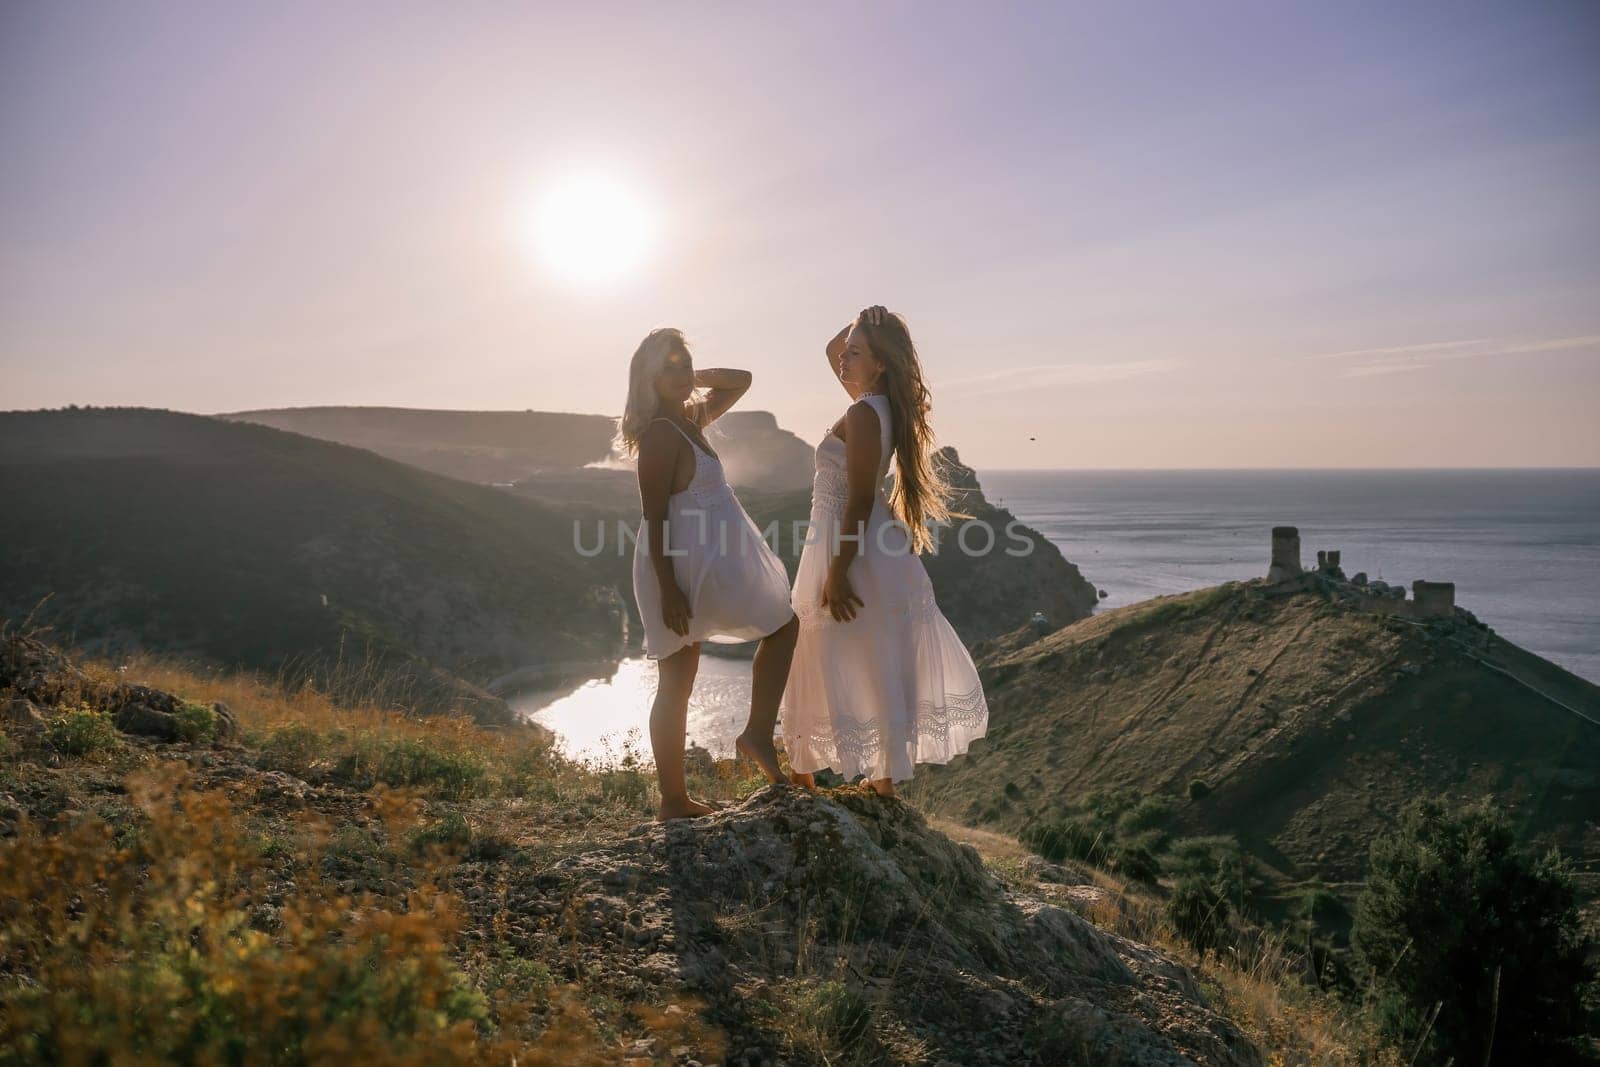 Two young girls are standing on a hillside, one of them wearing a white dress. The sun is shining brightly, creating a warm and inviting atmosphere. The girls seem to be enjoying their time together